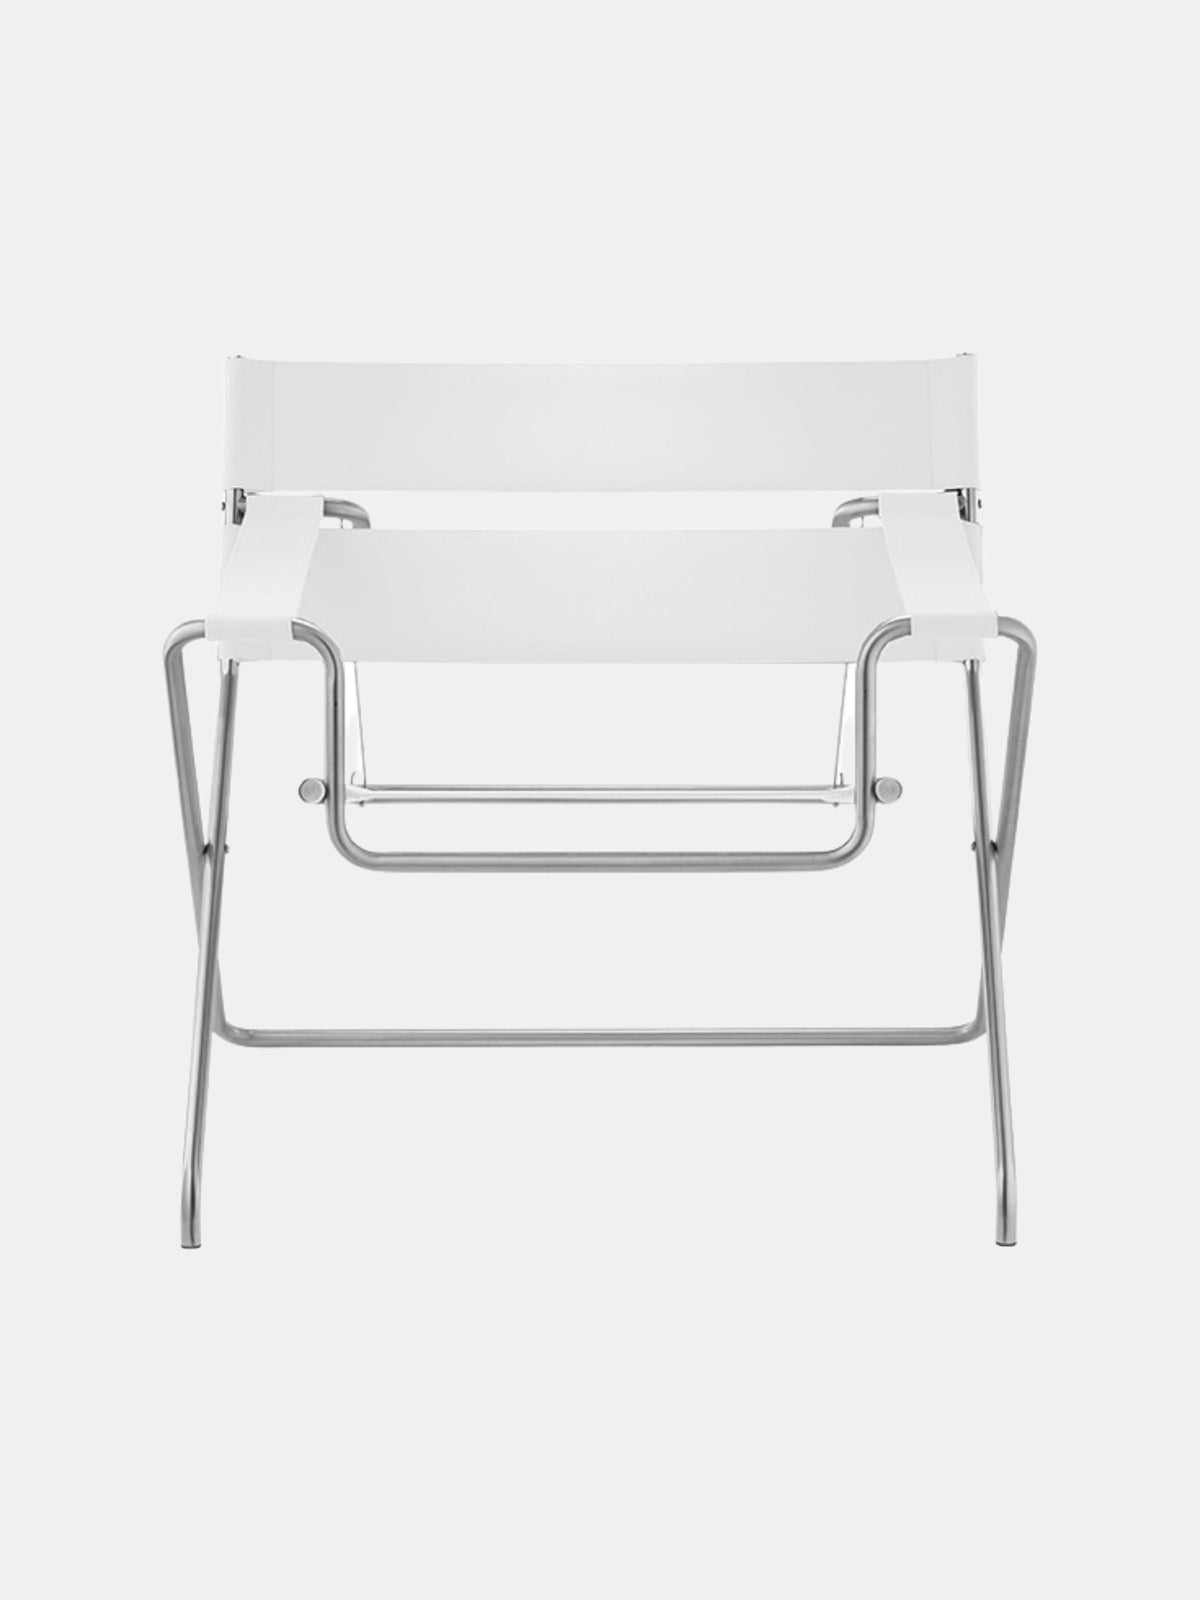 D4 Lounge Chair designed by Marcel Breuer